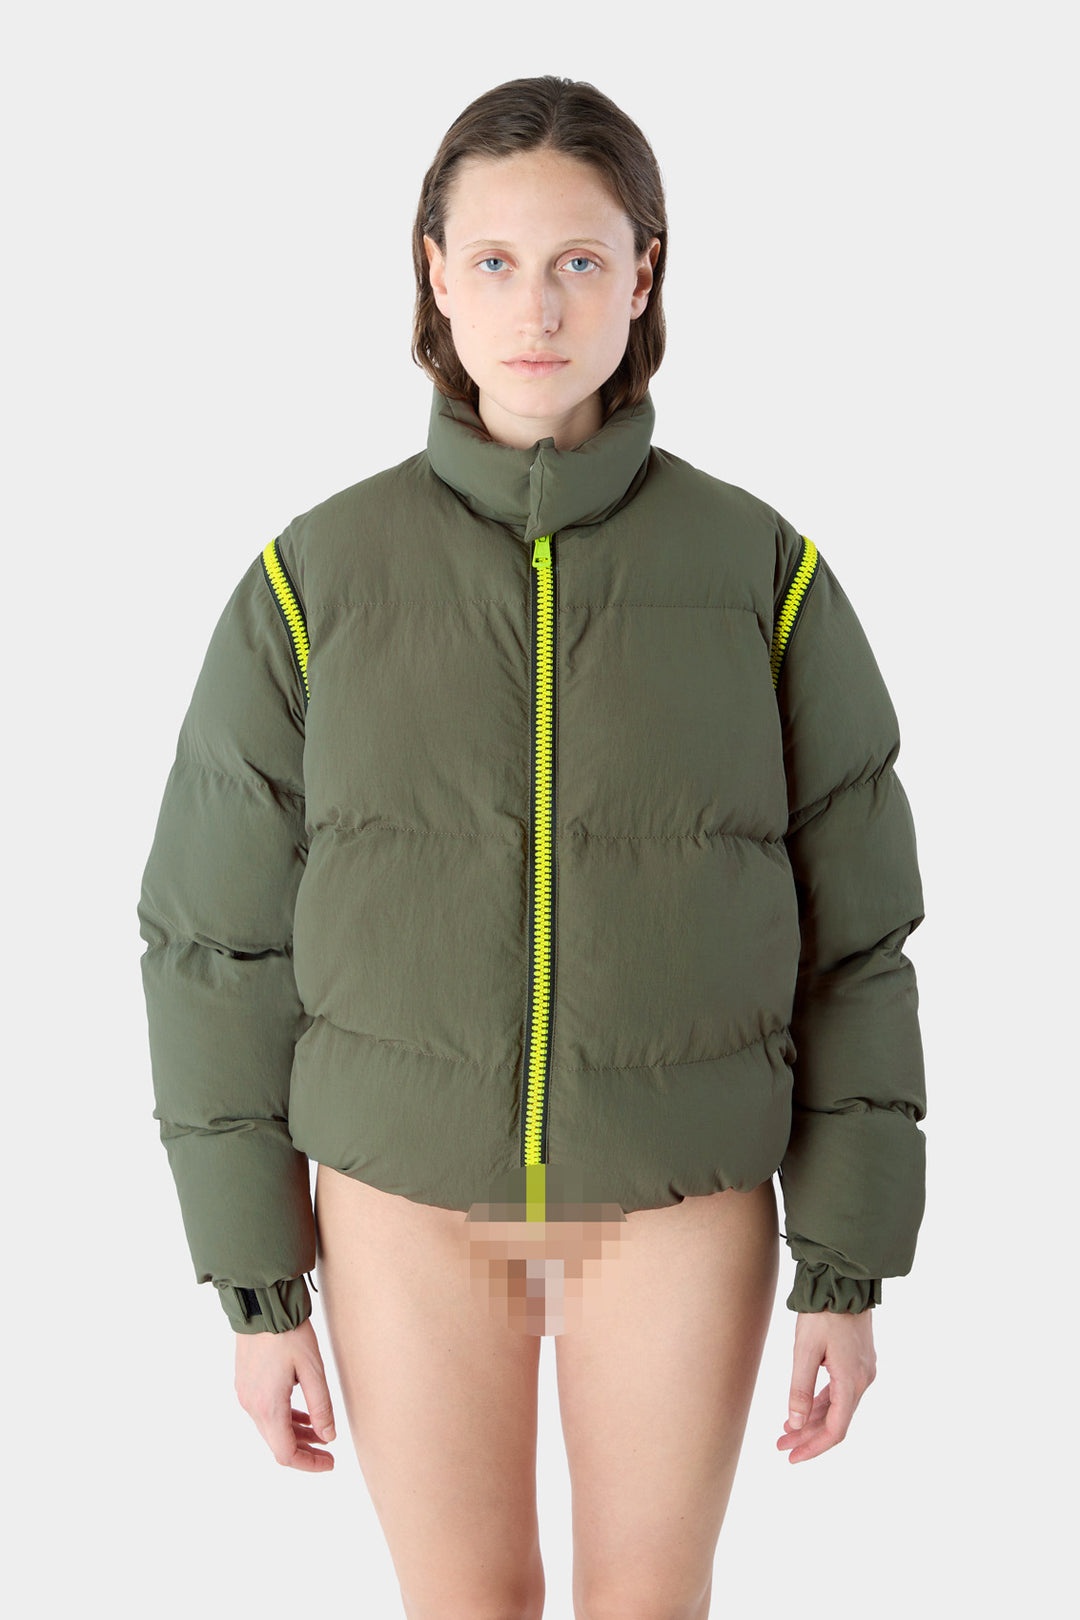 DOWN JACKET / military green - 2